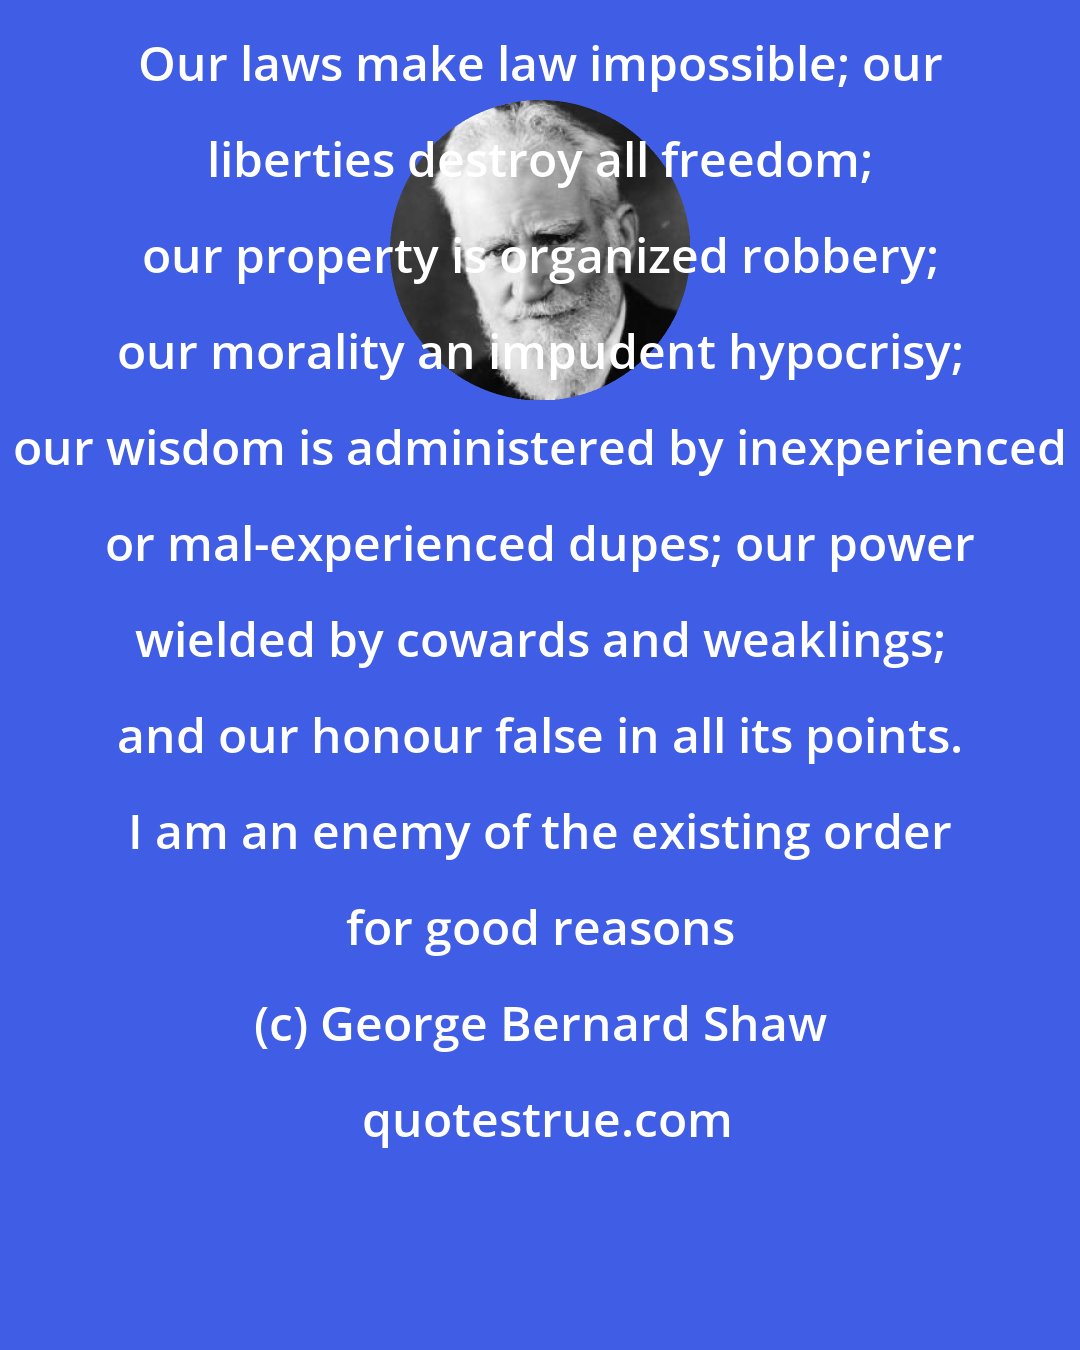 George Bernard Shaw: Our laws make law impossible; our liberties destroy all freedom; our property is organized robbery; our morality an impudent hypocrisy; our wisdom is administered by inexperienced or mal-experienced dupes; our power wielded by cowards and weaklings; and our honour false in all its points. I am an enemy of the existing order for good reasons